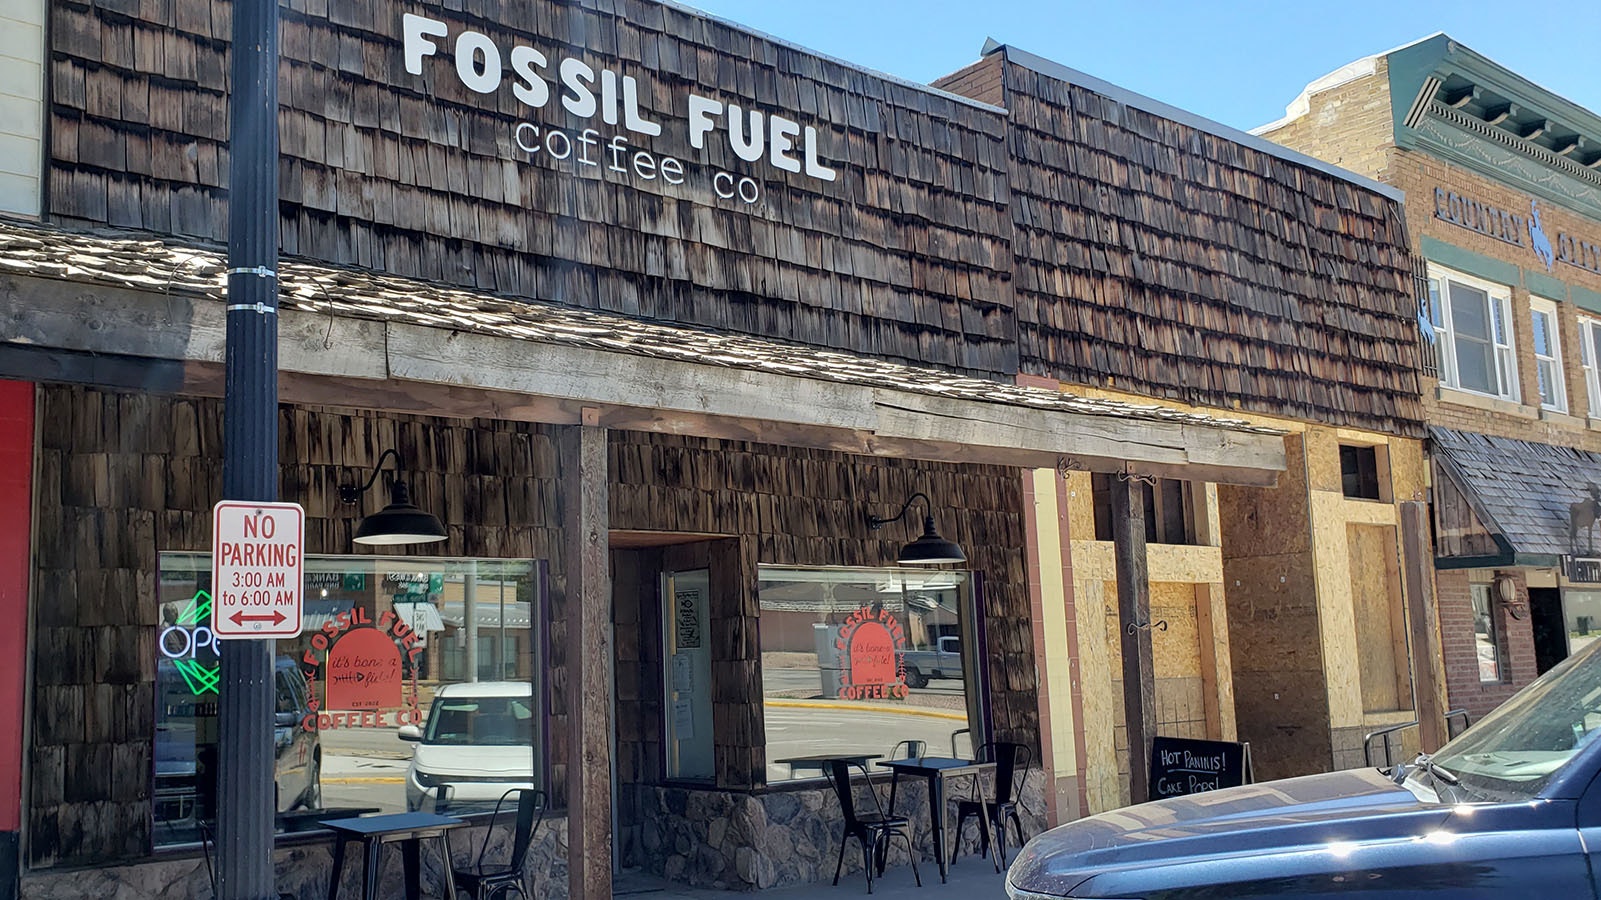 Fossil Fuel is among new businesses starting up in Kemmerer. It recently celebrated its first anniversary.